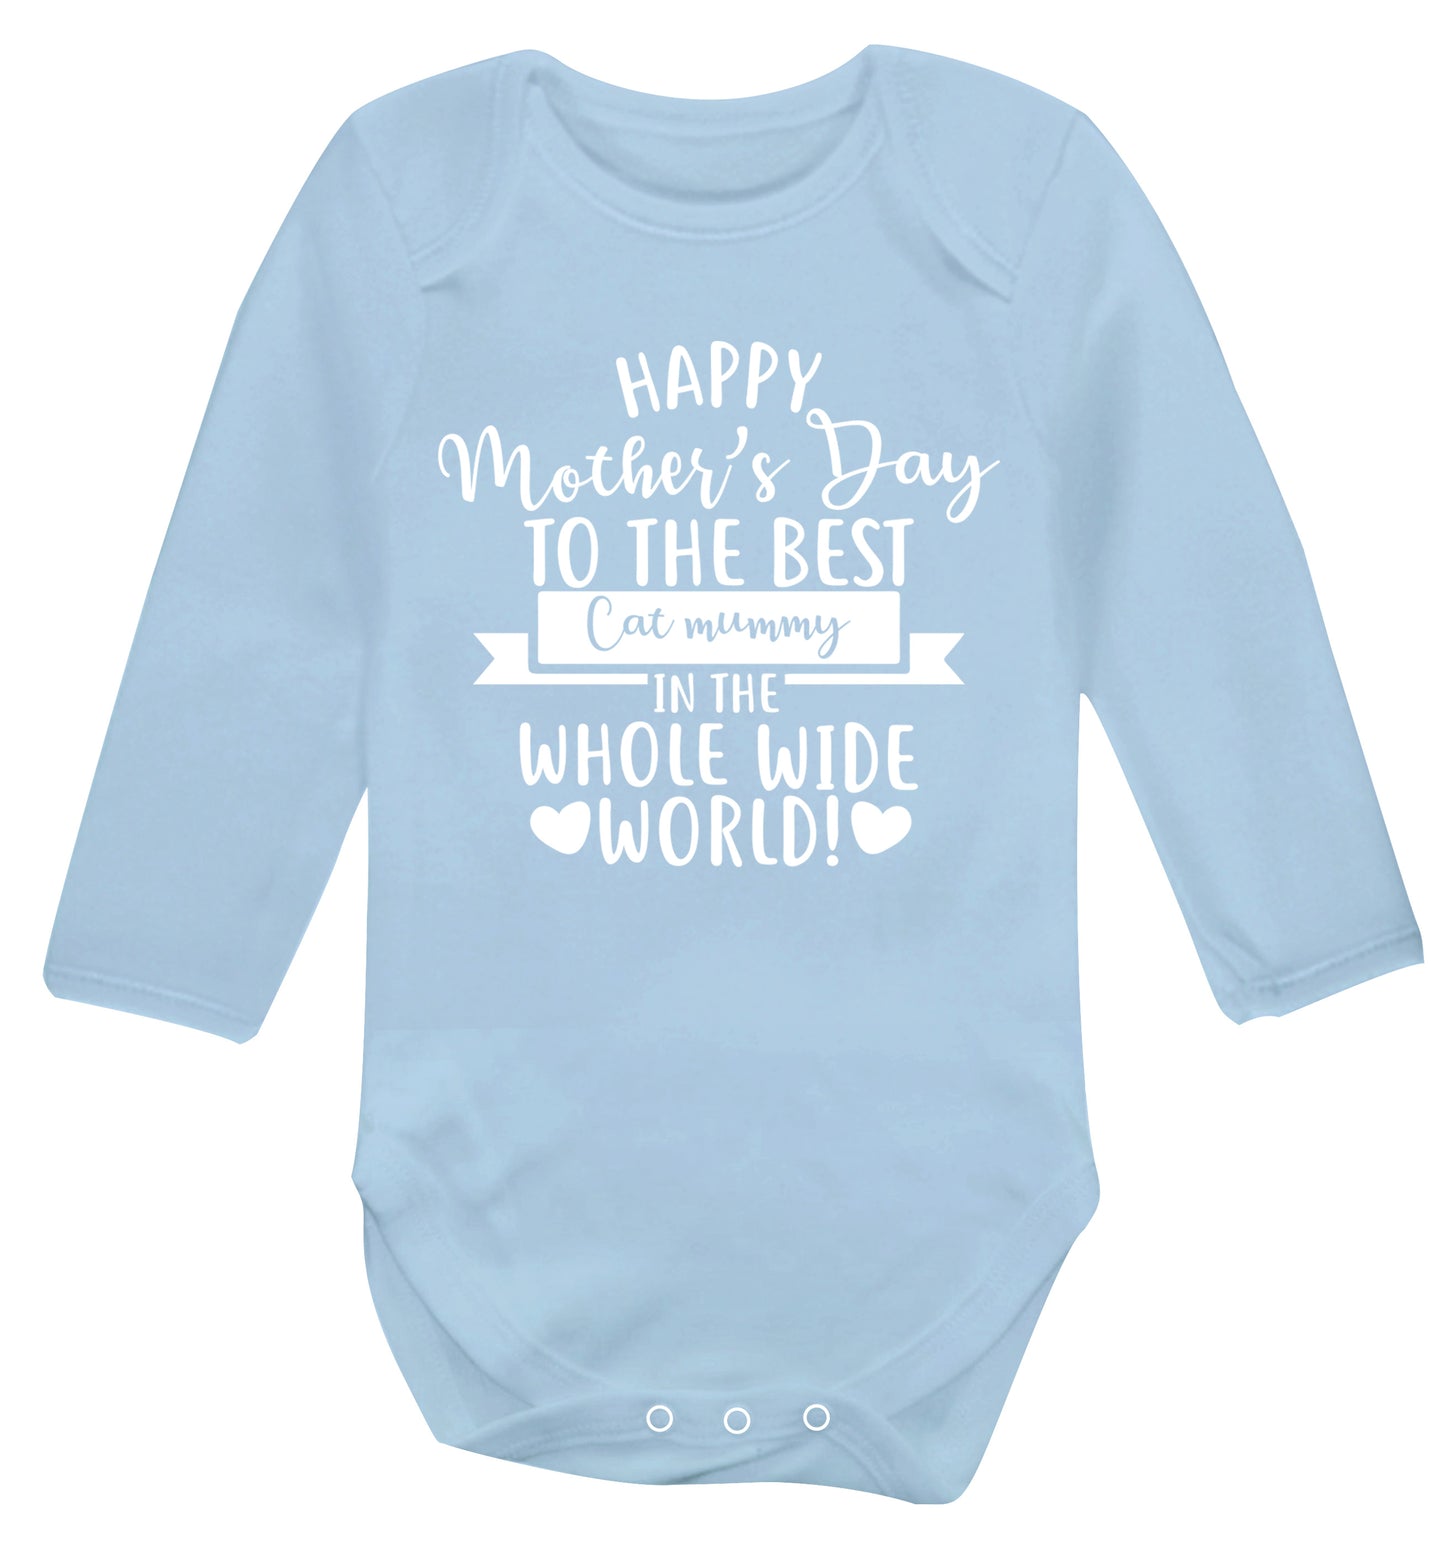 Happy mother's day to the best cat mummy in the world Baby Vest long sleeved pale blue 6-12 months